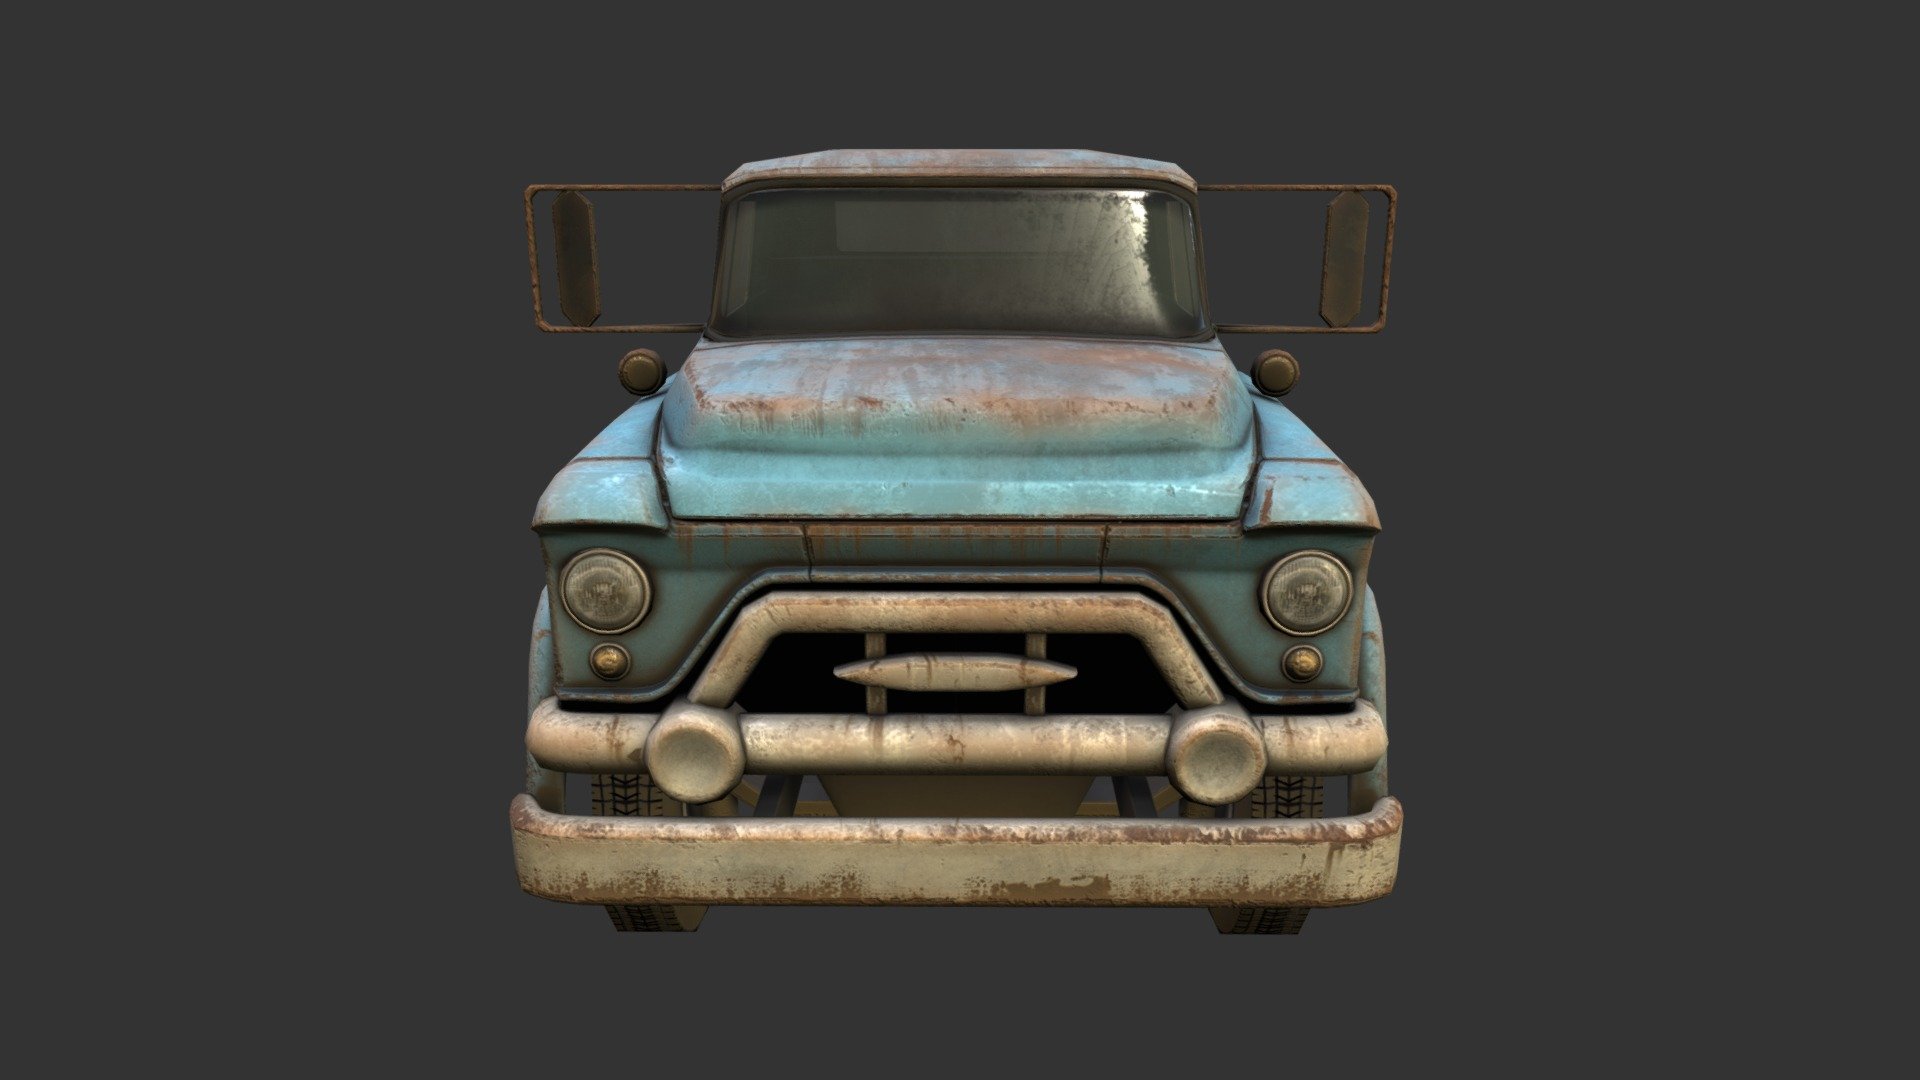 An old 1950's heavy truck, it's a work in progress, I still need to make different bed types for it. Anyone here have suggestions as far as what I should make for them?

Made with 3DSMax and Substance Painter - 1957 Truck WIP - 3D model by Renafox (@kryik1023) 3d model